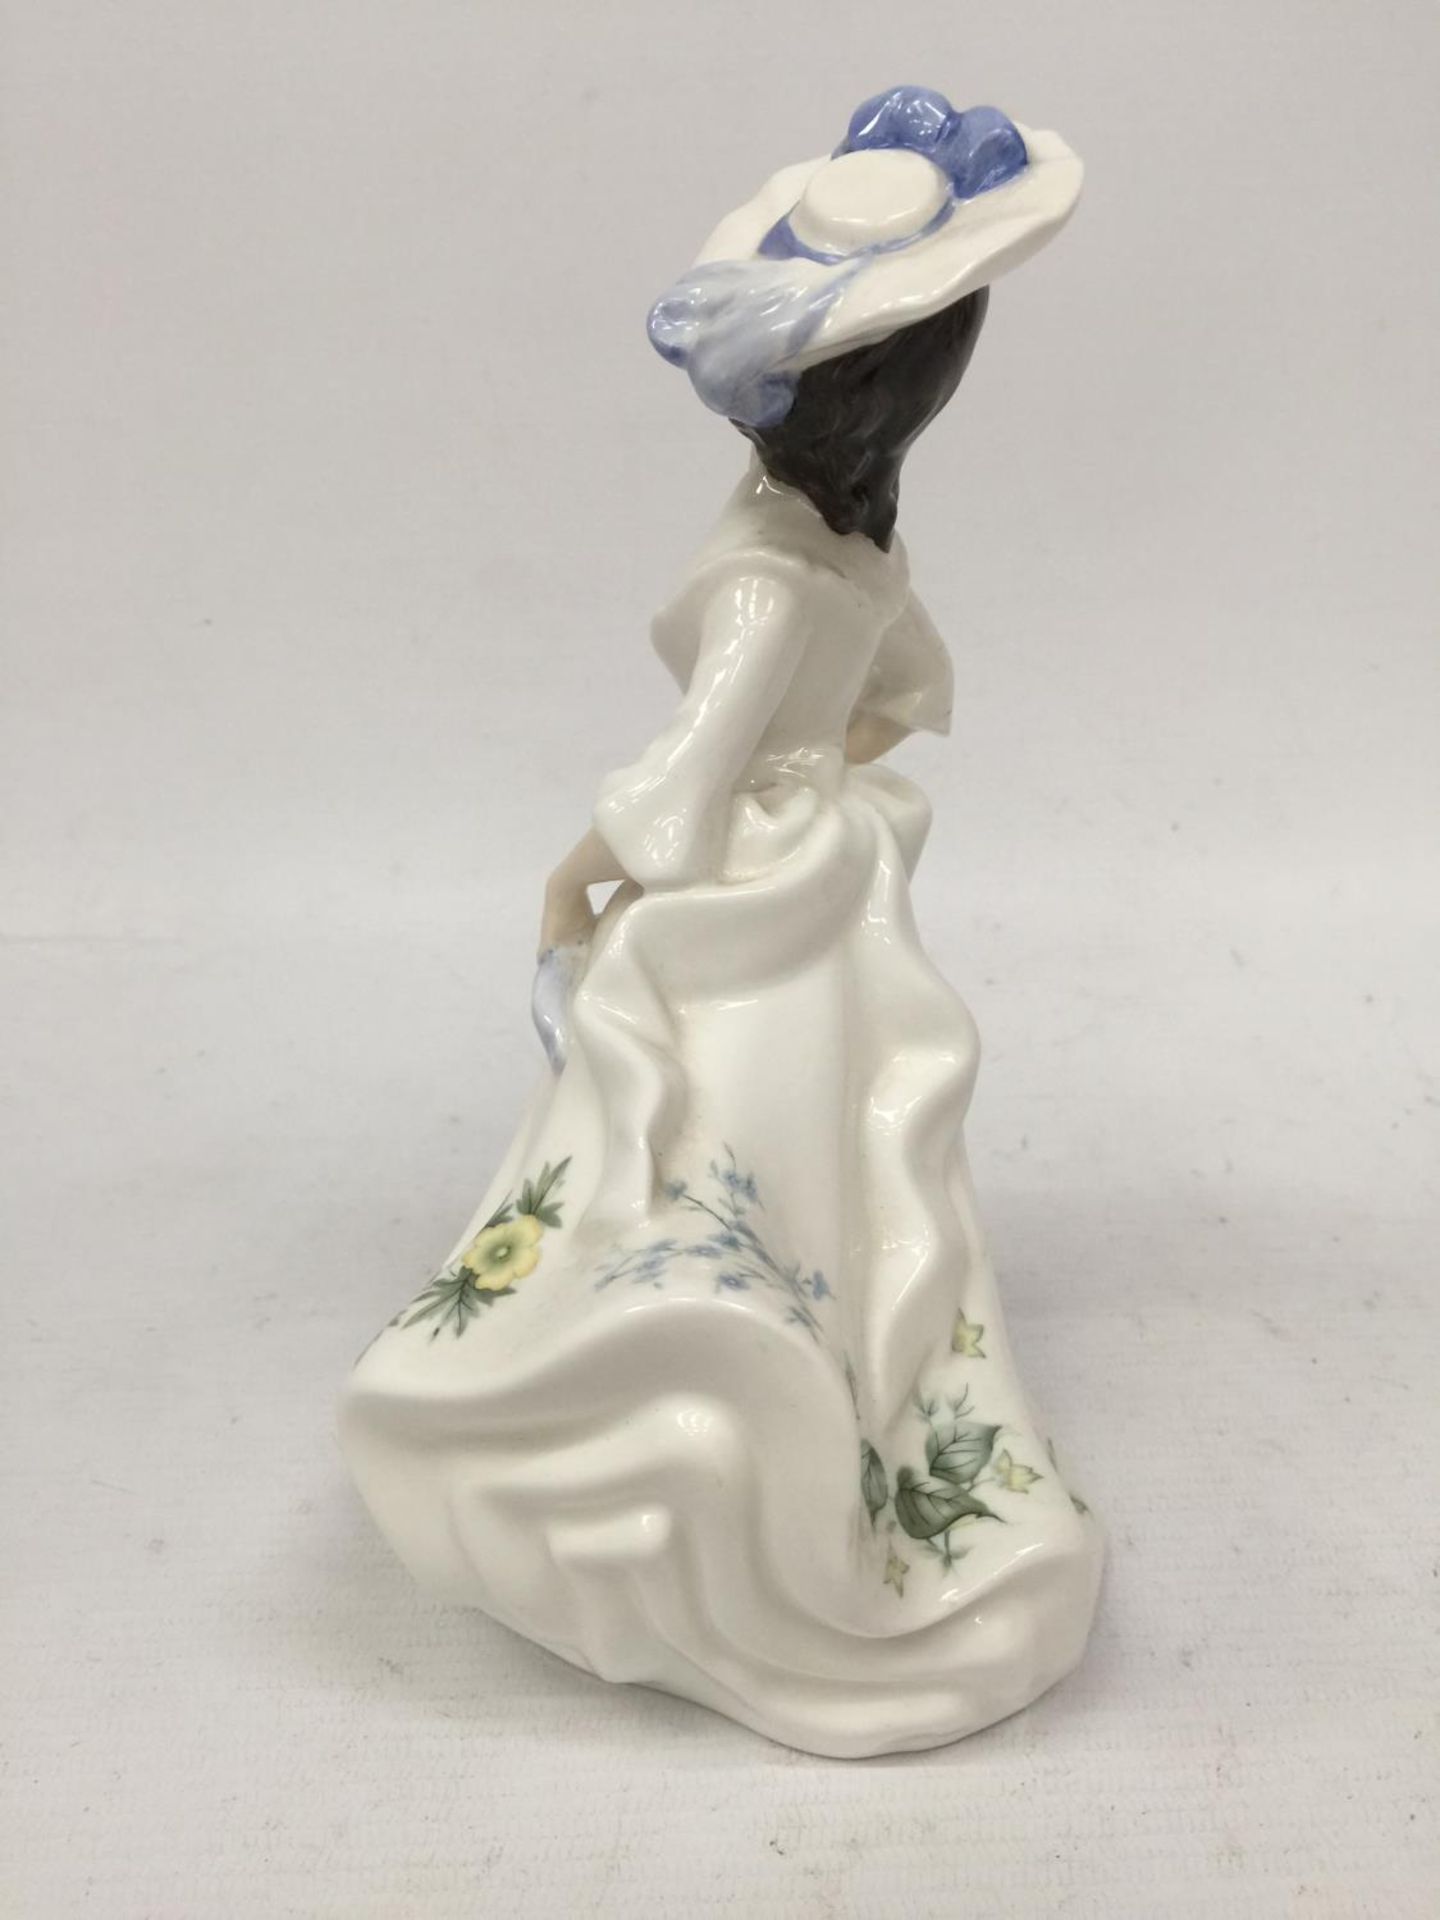 A ROYAL DOULTON FIGURINE "ADELE" - 21 CM (SECONDS) A/F - Image 4 of 4